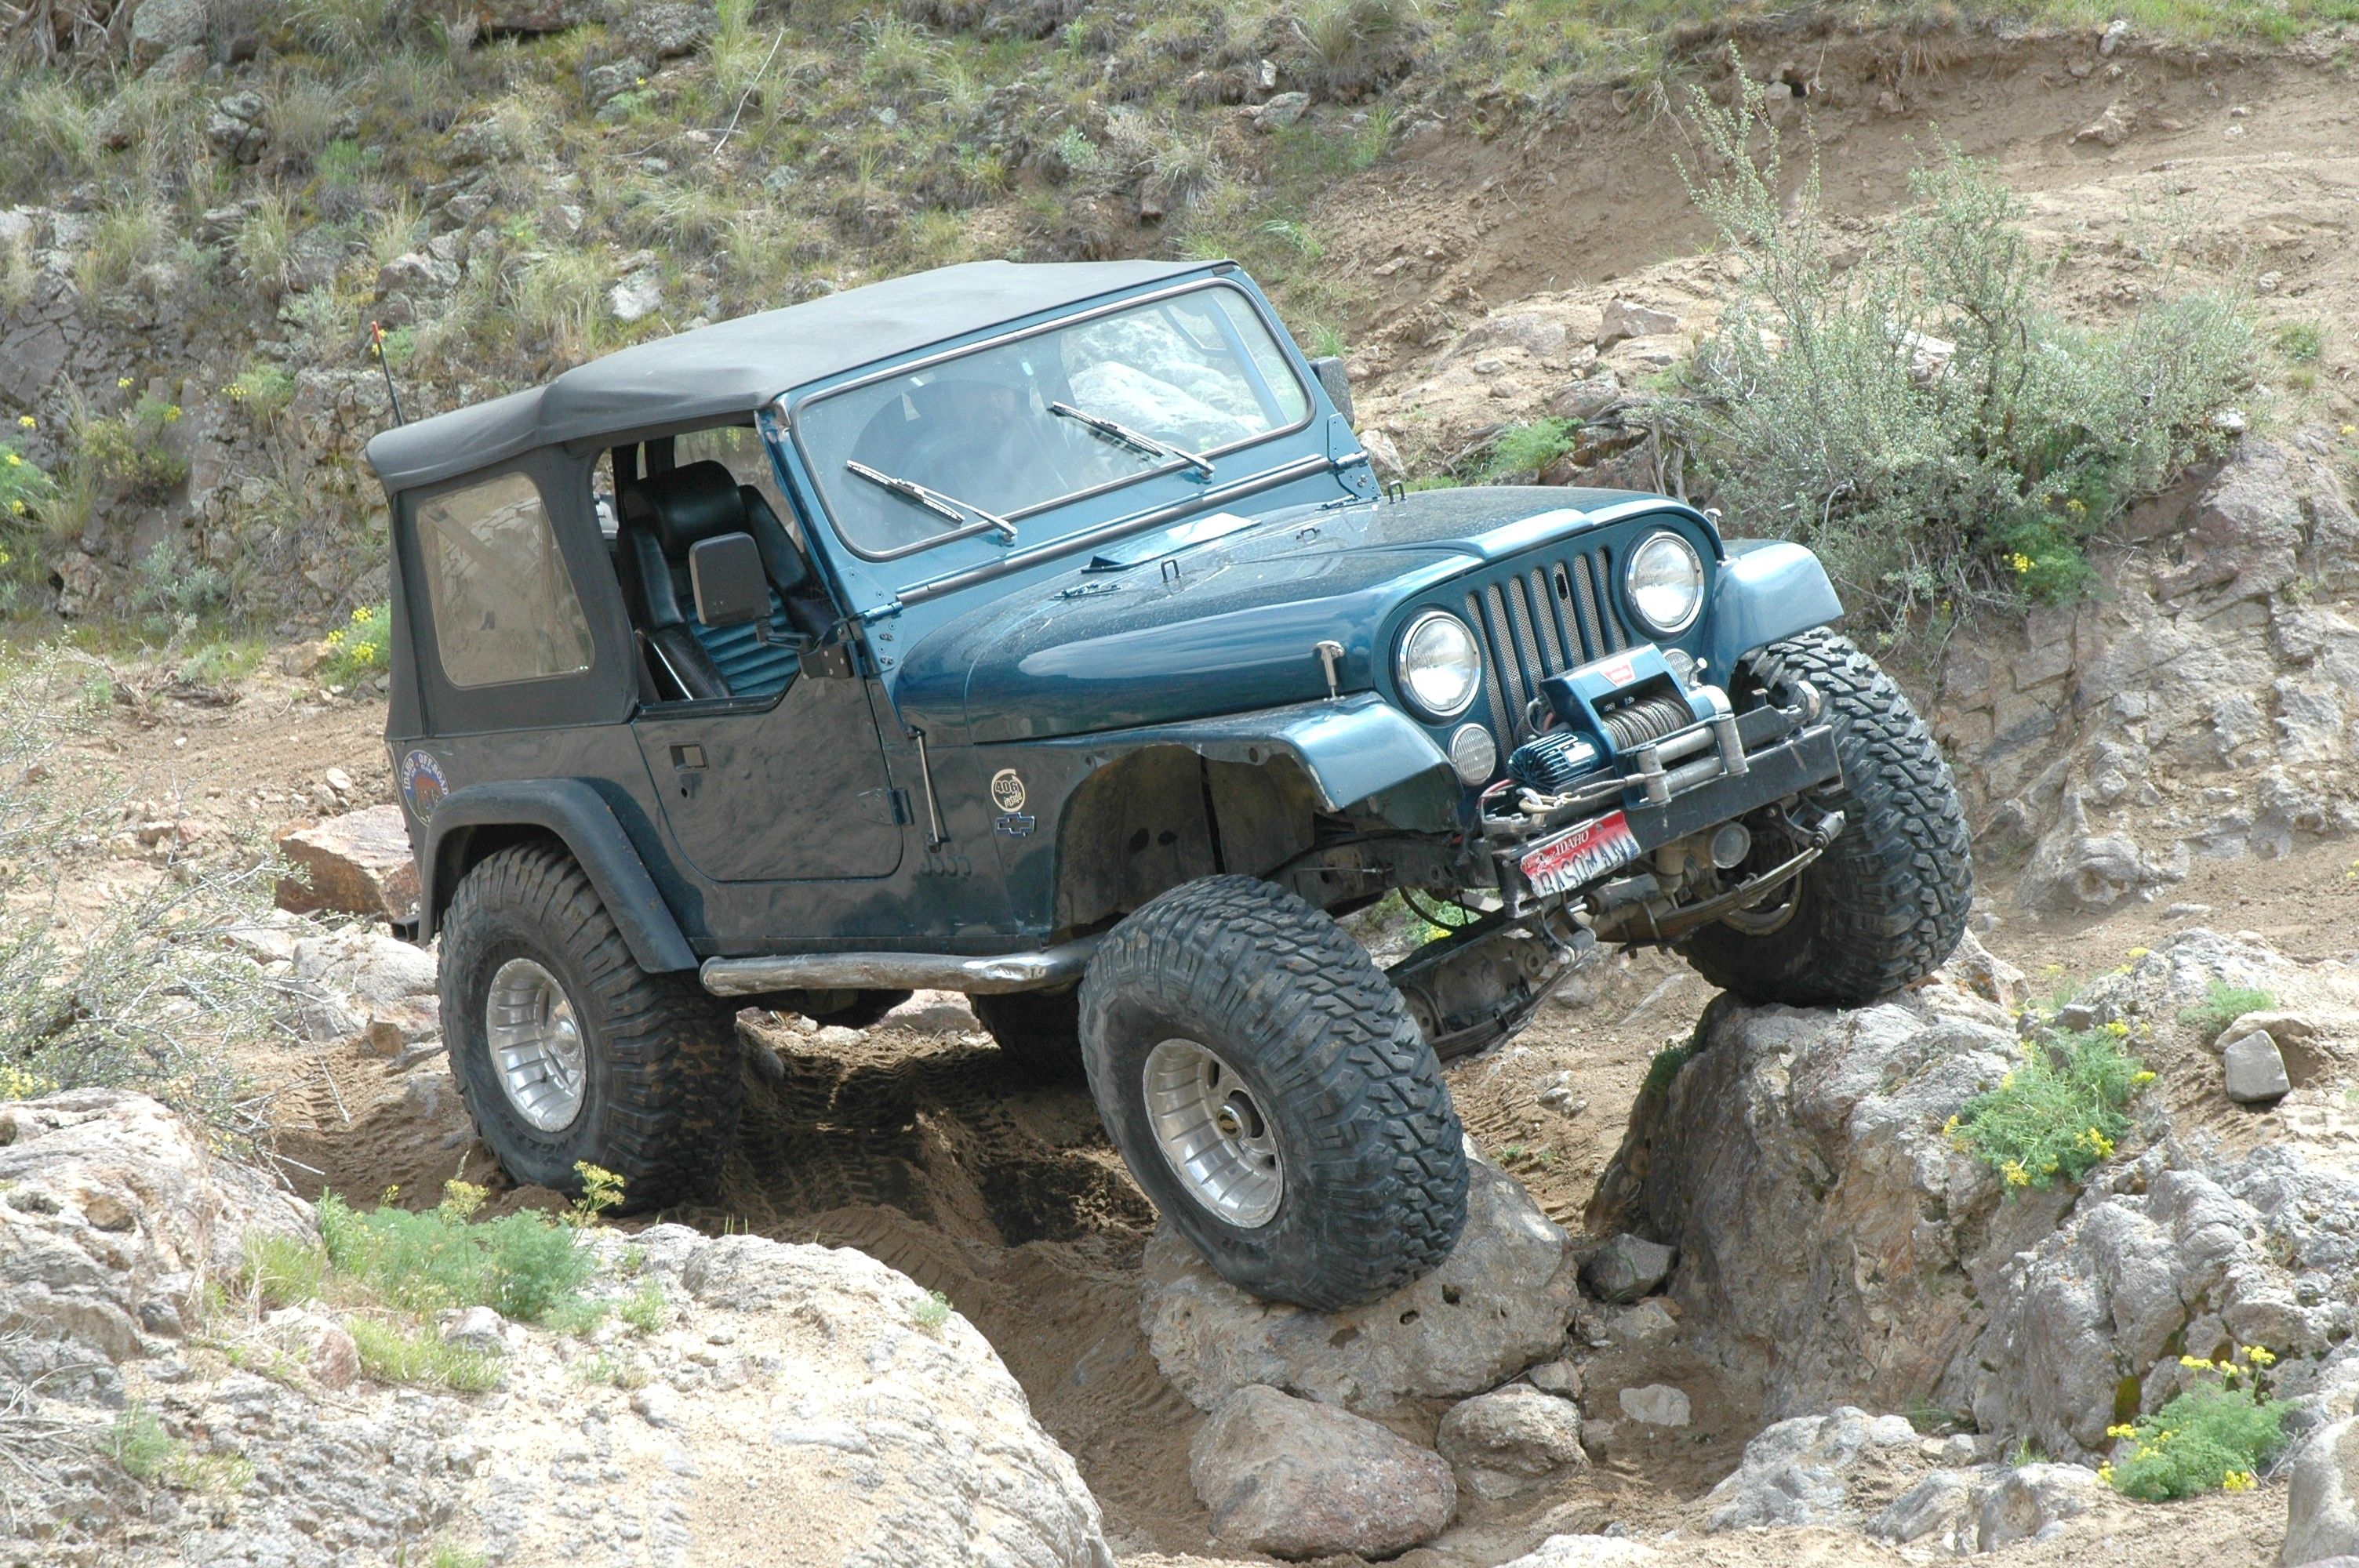 Jeep barely making it up hill